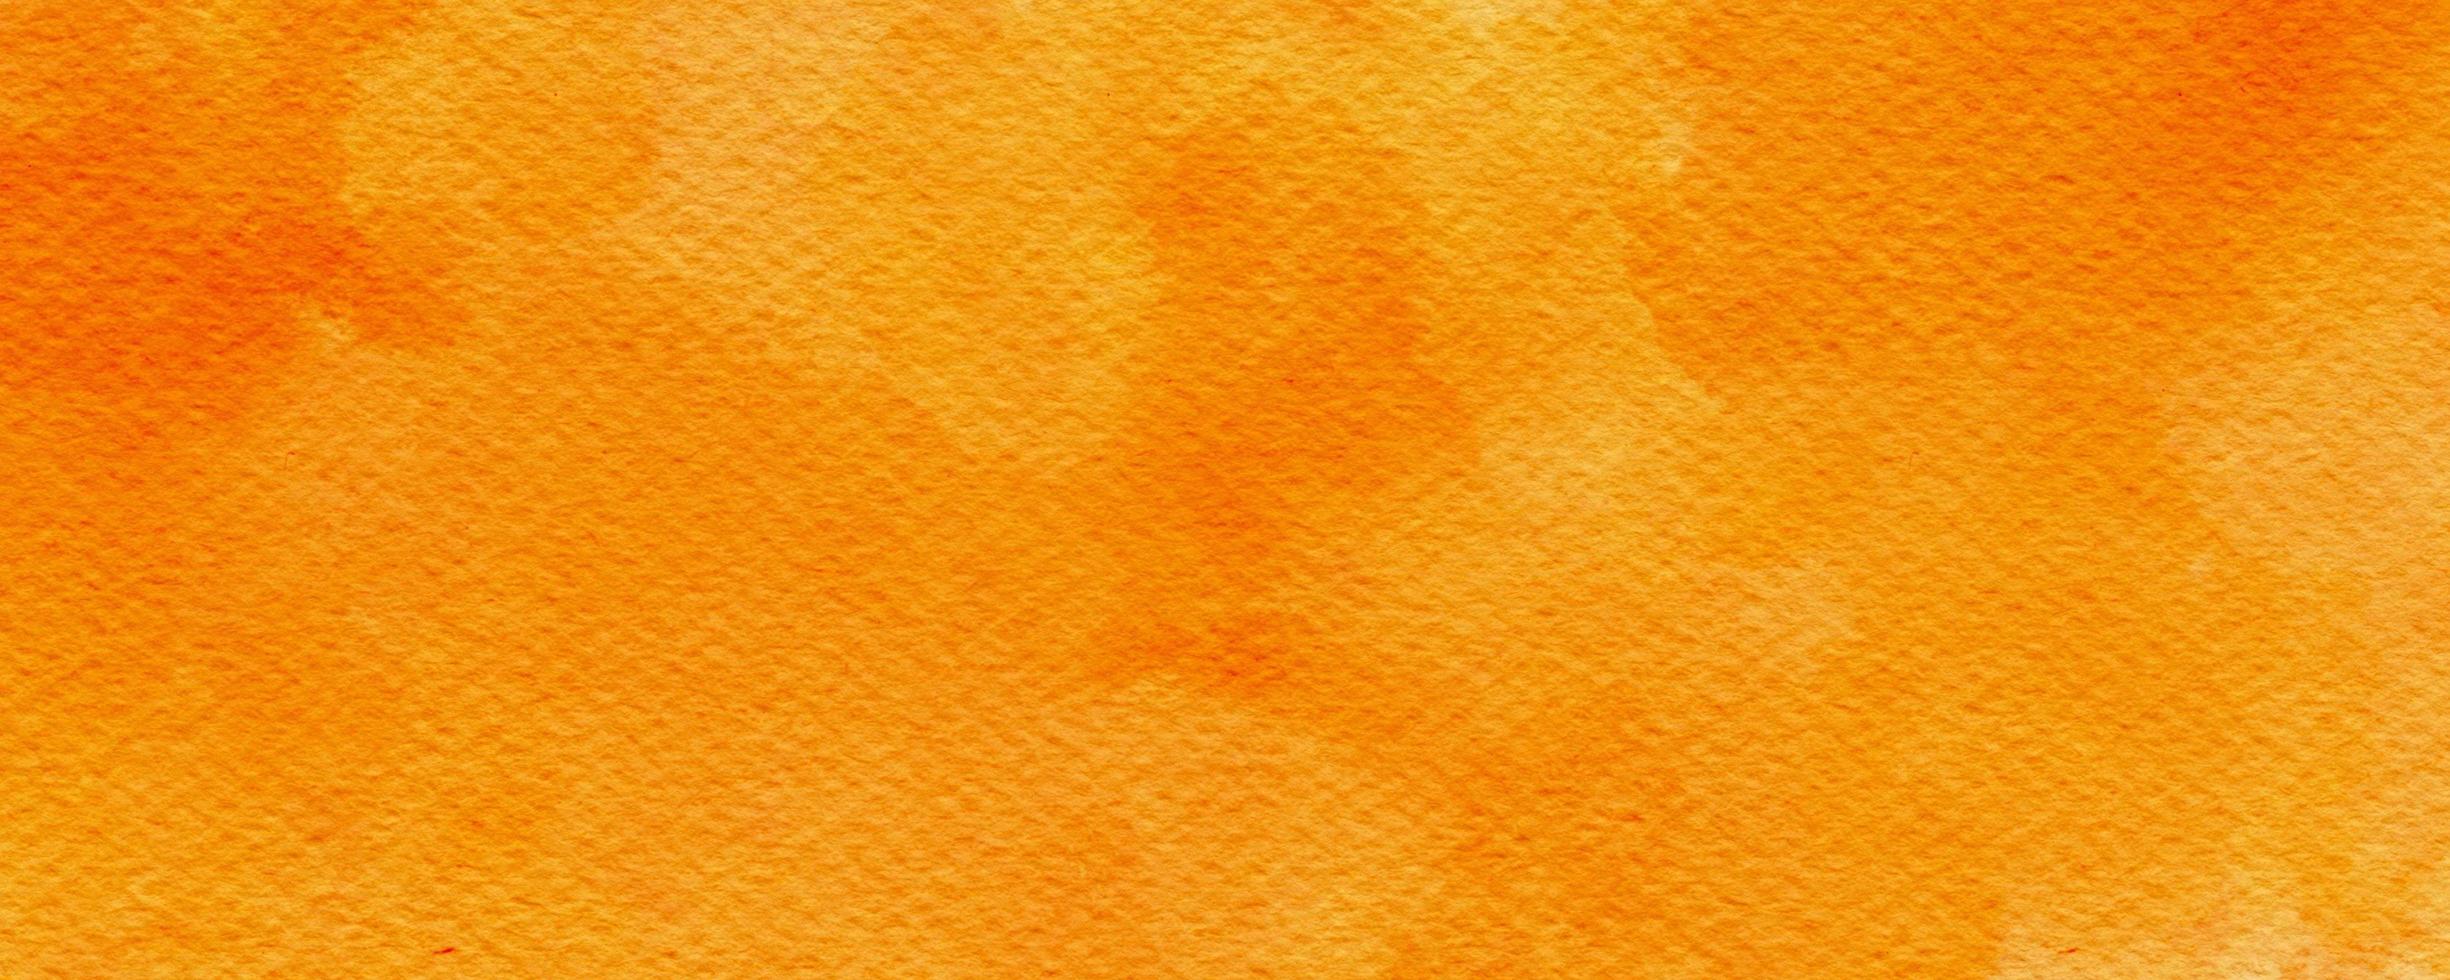 Orange Watercolor abstract texture rectangle background photo